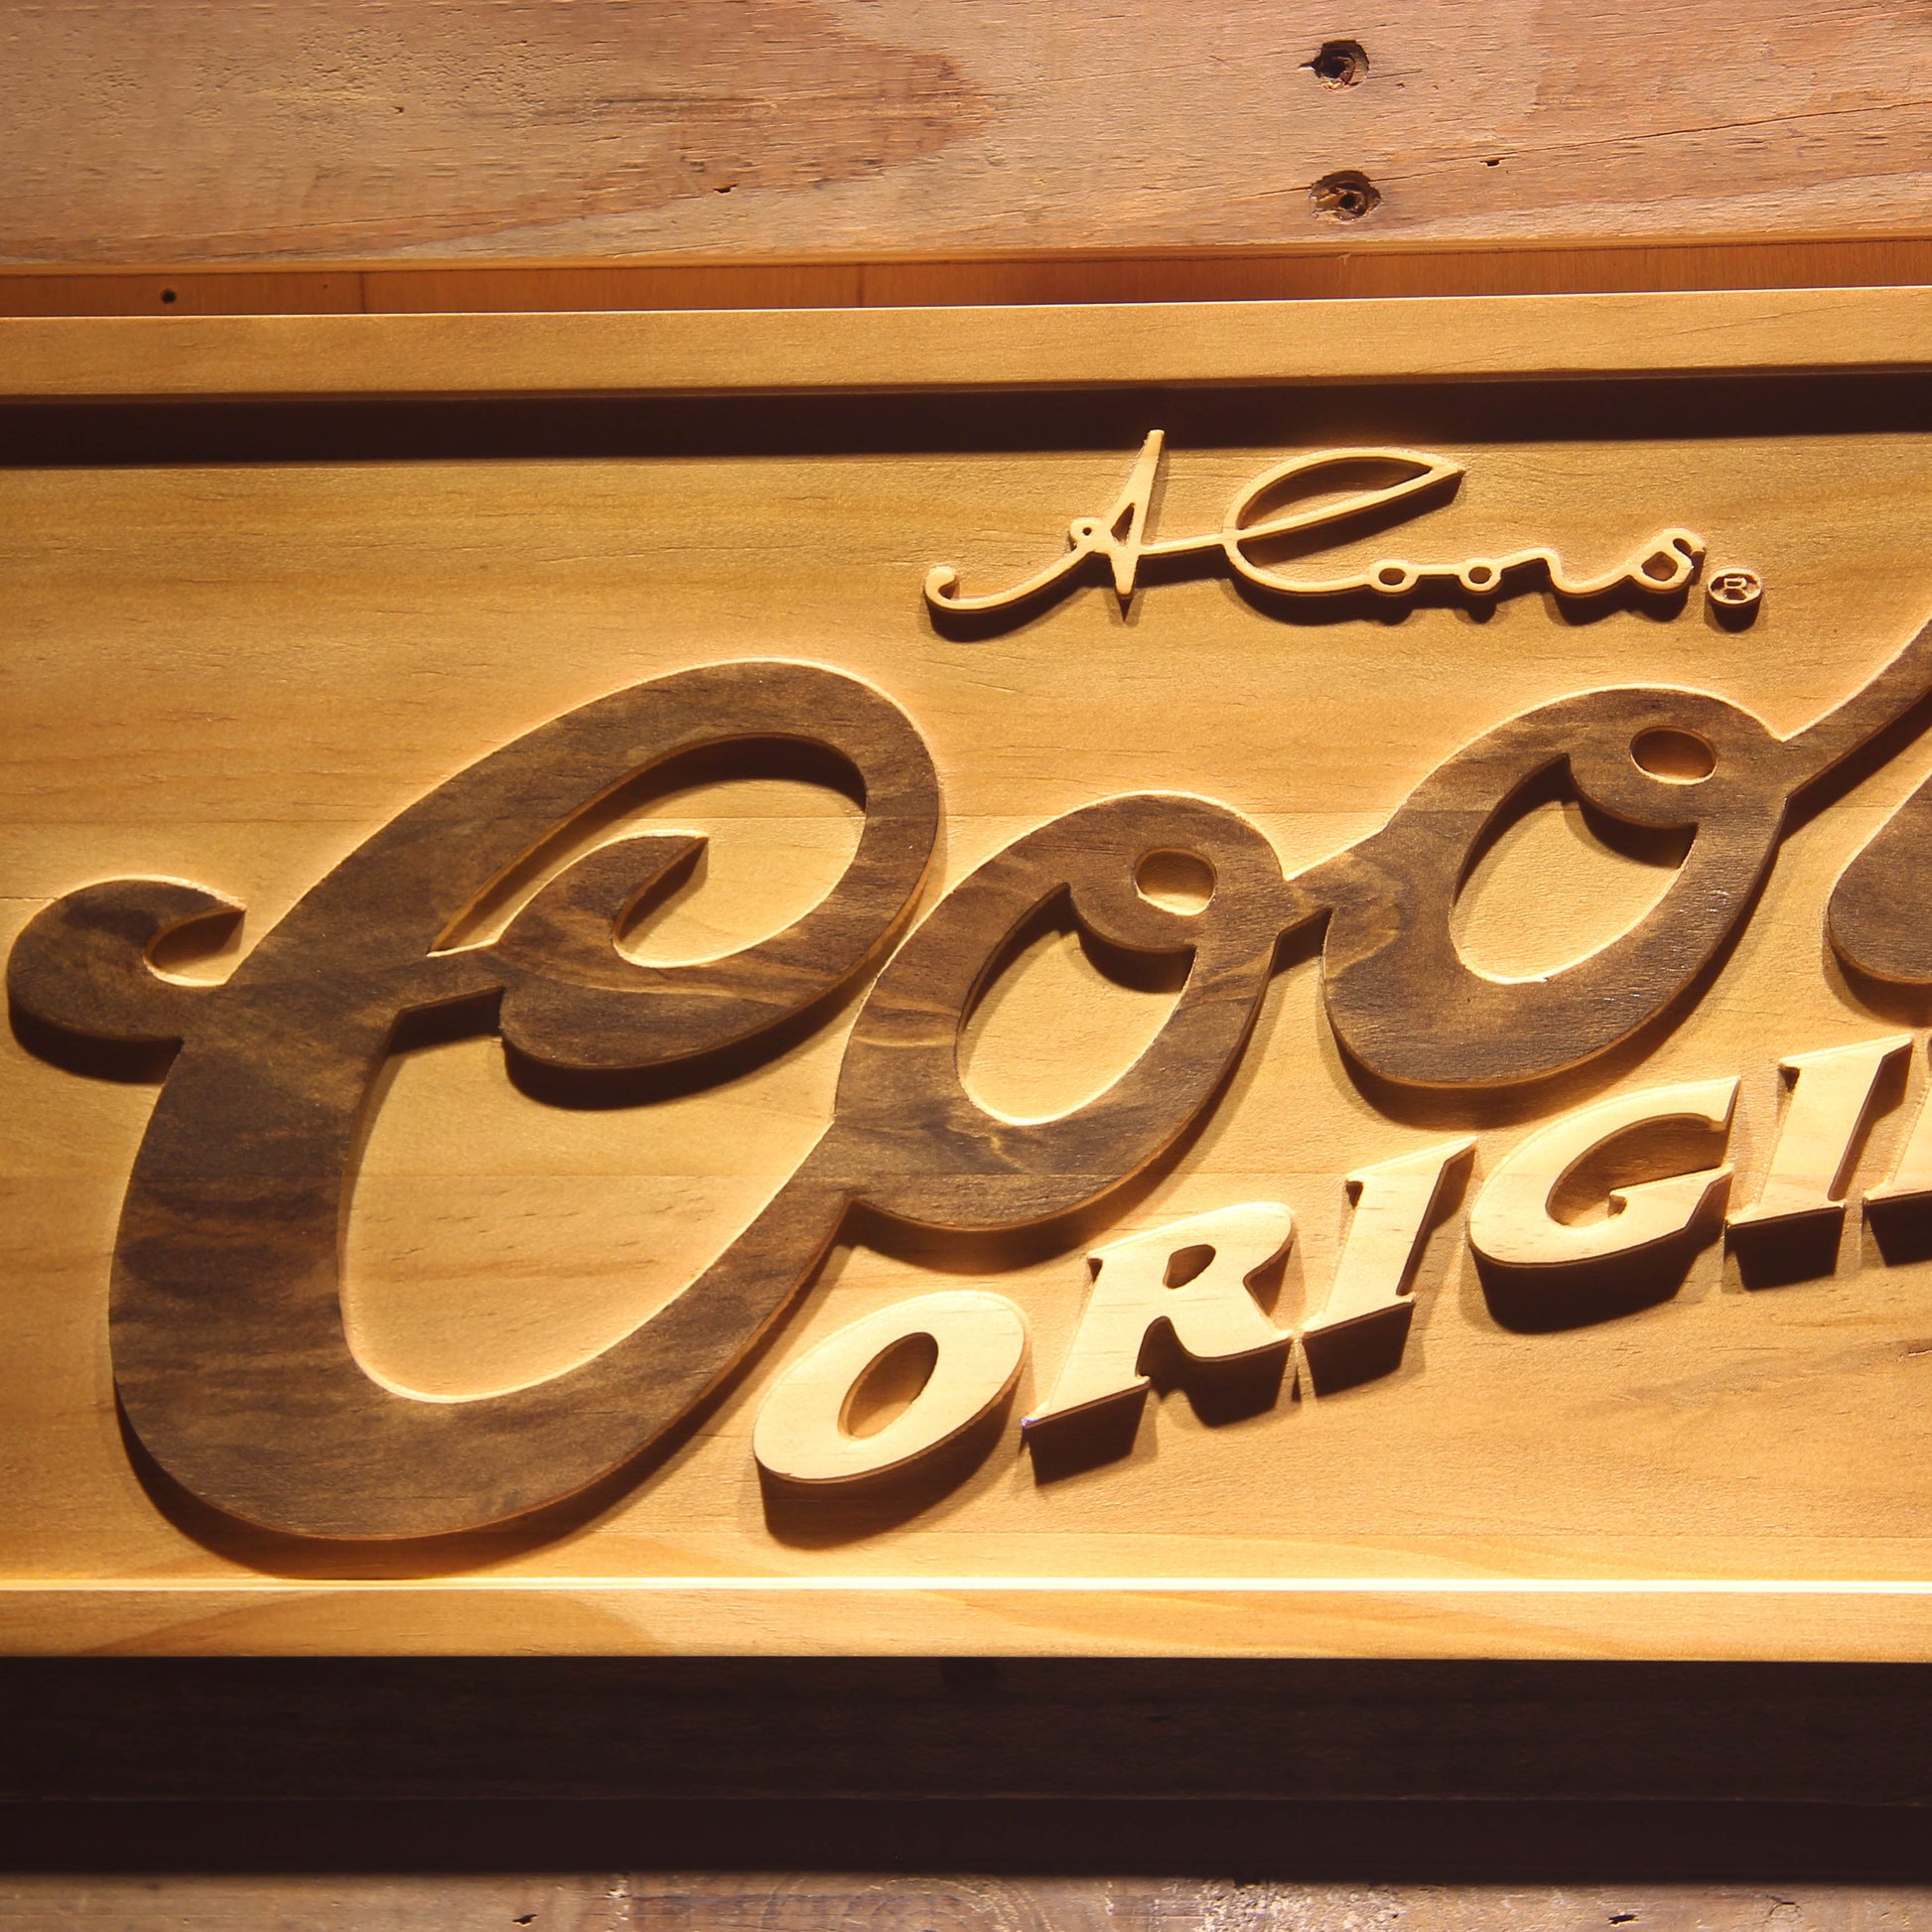 Coors Original  3D Wooden Bar Signs by Woody Signs Co. - Handmade Crafted Unique Wooden Creative